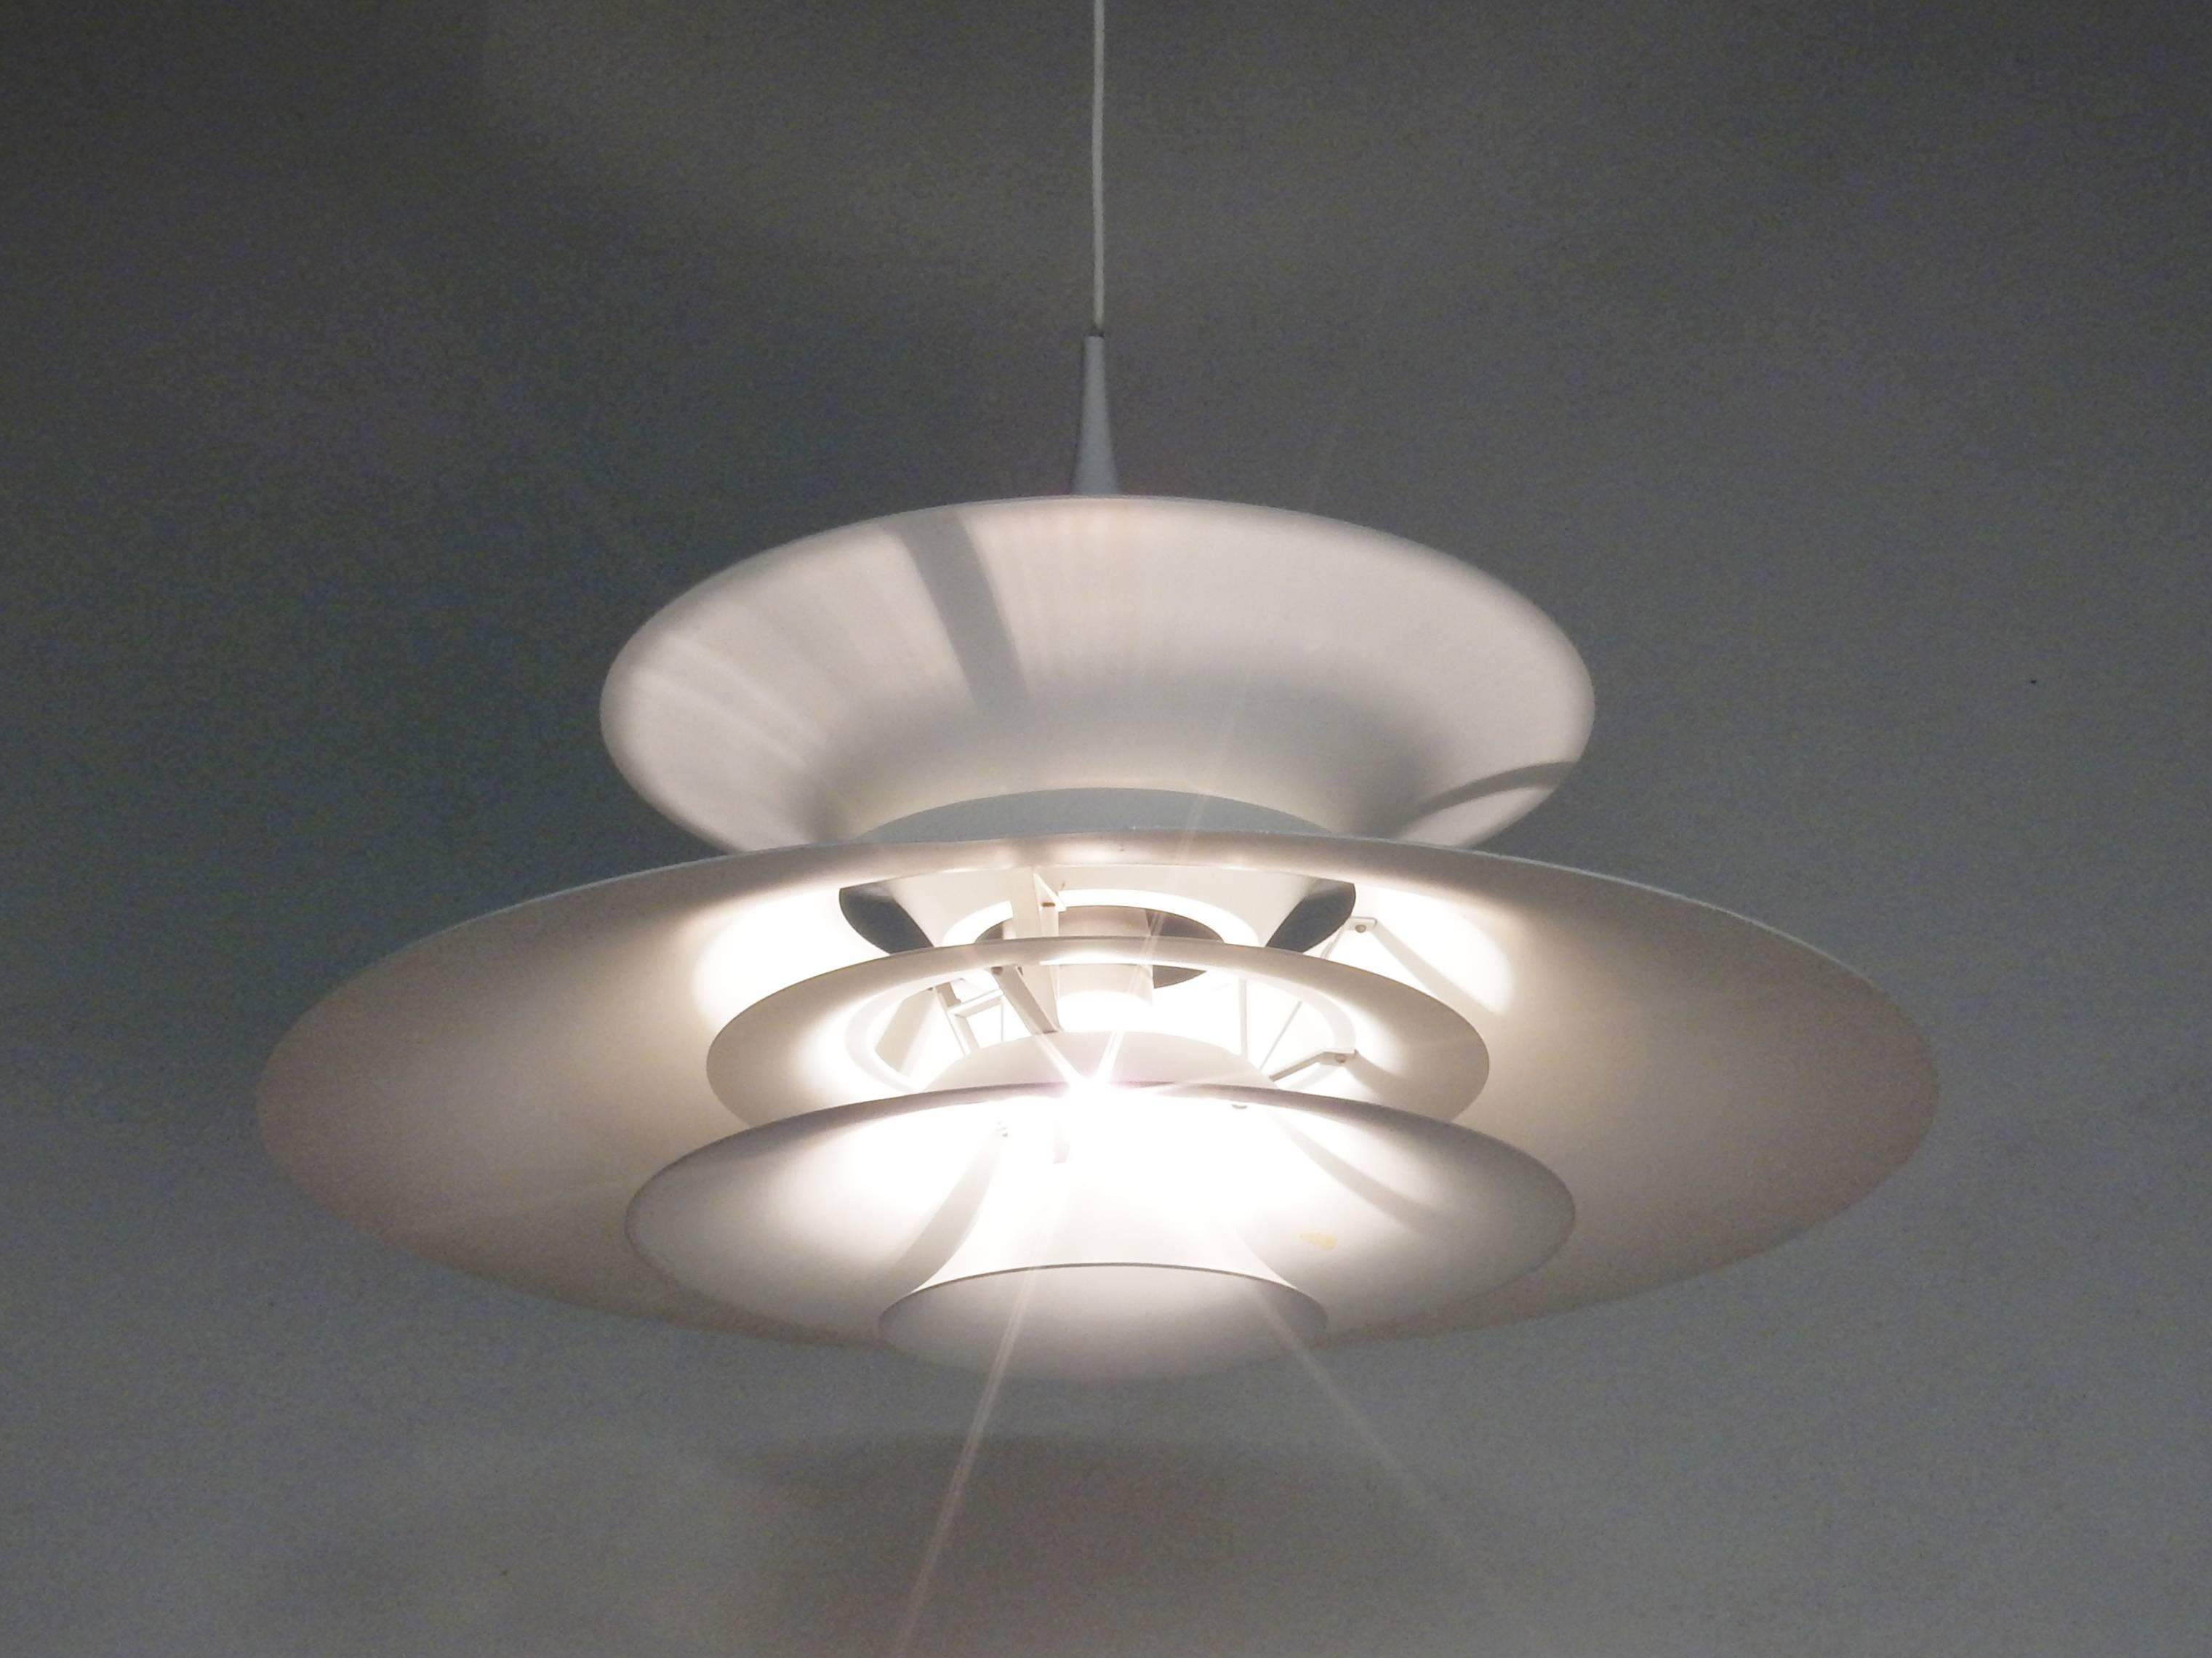 This pendant is of a quite large size of 60cm in Ø. The radius II is the second largest version of the radius lights. The size of this pendant light makes is very suitable for an entry hall or dining area. 
The pendant has an overall white color